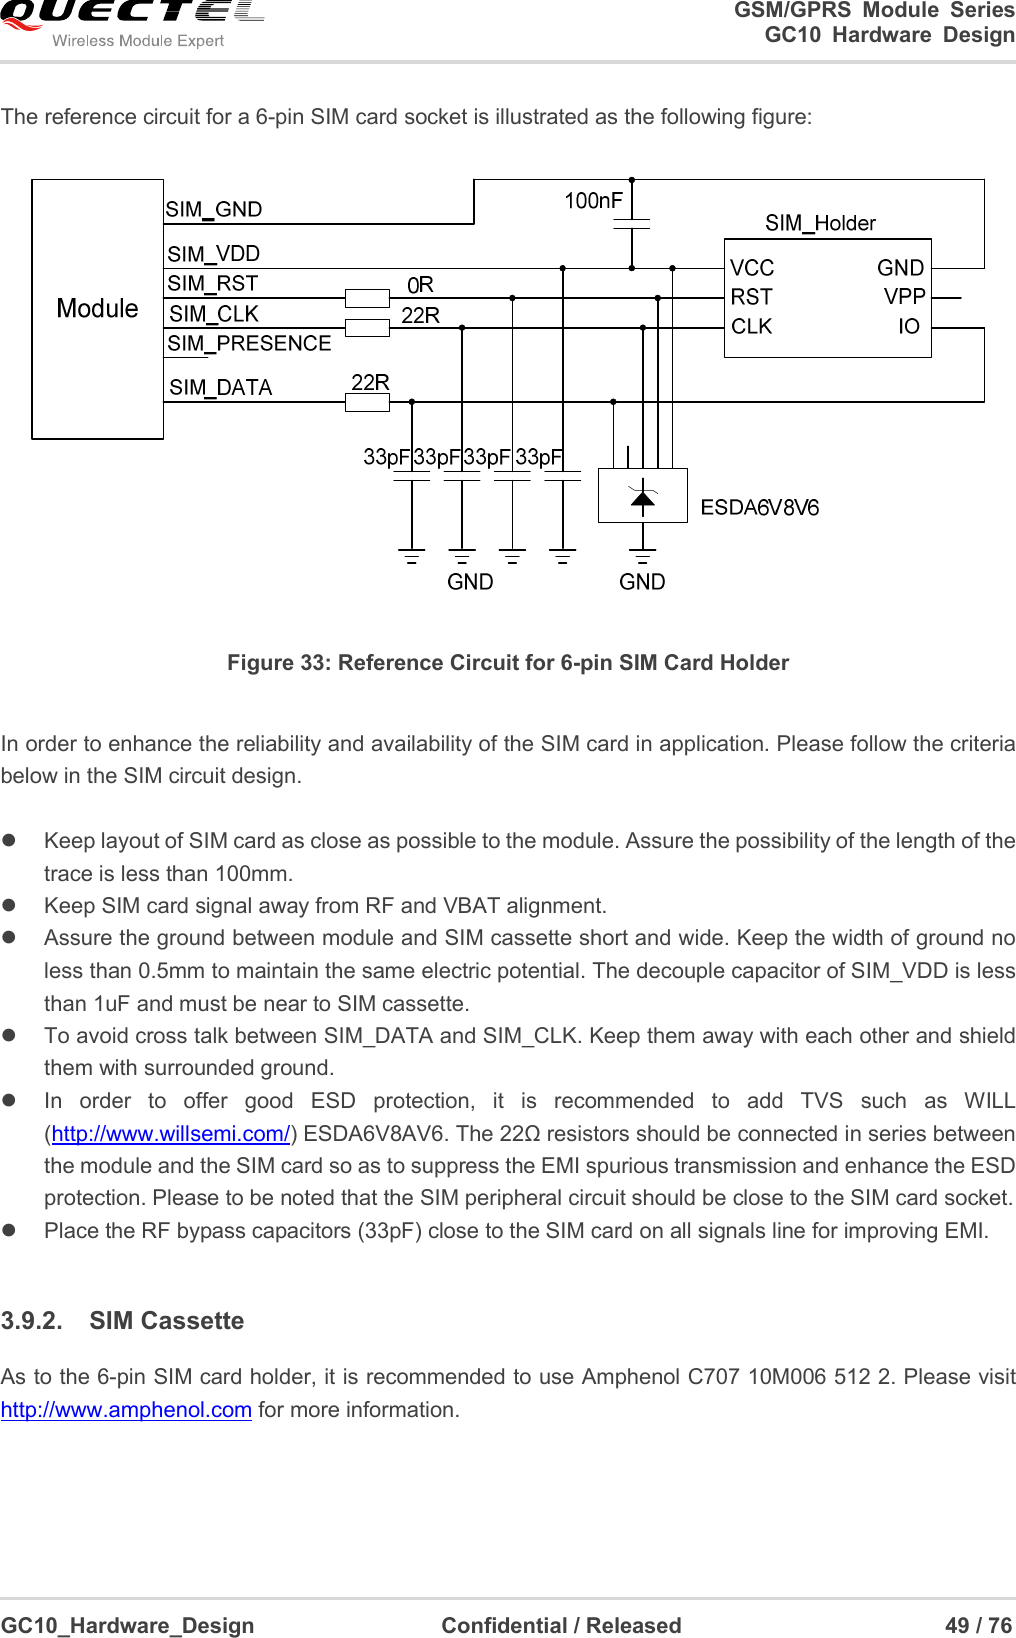                                                                          GSM/GPRS  Module  Series                                                                 GC10 Hardware Design  GC10_Hardware_Design                                  Confidential / Released                                                49 / 76      The reference circuit for a 6-pin SIM card socket is illustrated as the following figure:  Figure 33: Reference Circuit for 6-pin SIM Card Holder  In order to enhance the reliability and availability of the SIM card in application. Please follow the criteria below in the SIM circuit design.    Keep layout of SIM card as close as possible to the module. Assure the possibility of the length of the trace is less than 100mm.     Keep SIM card signal away from RF and VBAT alignment.   Assure the ground between module and SIM cassette short and wide. Keep the width of ground no less than 0.5mm to maintain the same electric potential. The decouple capacitor of SIM_VDD is less than 1uF and must be near to SIM cassette.       To avoid cross talk between SIM_DATA and SIM_CLK. Keep them away with each other and shield them with surrounded ground.     In  order  to  offer  good  ESD  protection,  it  is  recommended  to  add  TVS  such  as  WILL (http://www.willsemi.com/) ESDA6V8AV6. The 22Ω resistors should be connected in series between the module and the SIM card so as to suppress the EMI spurious transmission and enhance the ESD protection. Please to be noted that the SIM peripheral circuit should be close to the SIM card socket.   Place the RF bypass capacitors (33pF) close to the SIM card on all signals line for improving EMI.     3.9.2.  SIM Cassette As to the 6-pin SIM card holder, it is recommended to use Amphenol C707 10M006 512 2. Please visit http://www.amphenol.com for more information.      